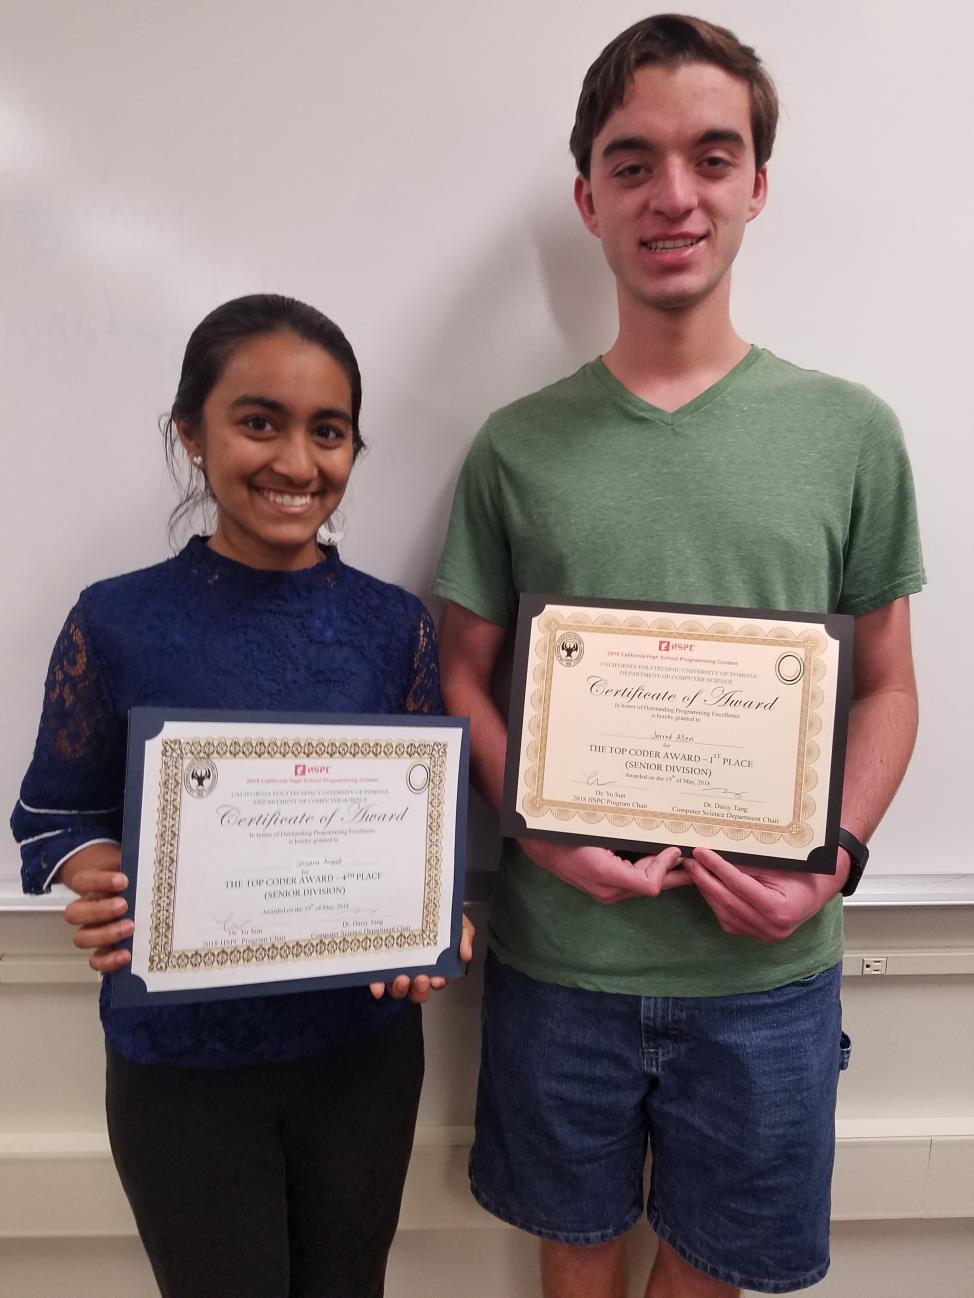 Open Division, and the Top Coder Award, and Shivana took fourth. Additionally, Shivana earned first place as the top female programmer and took home the Grace Hopper Award for that achievement!